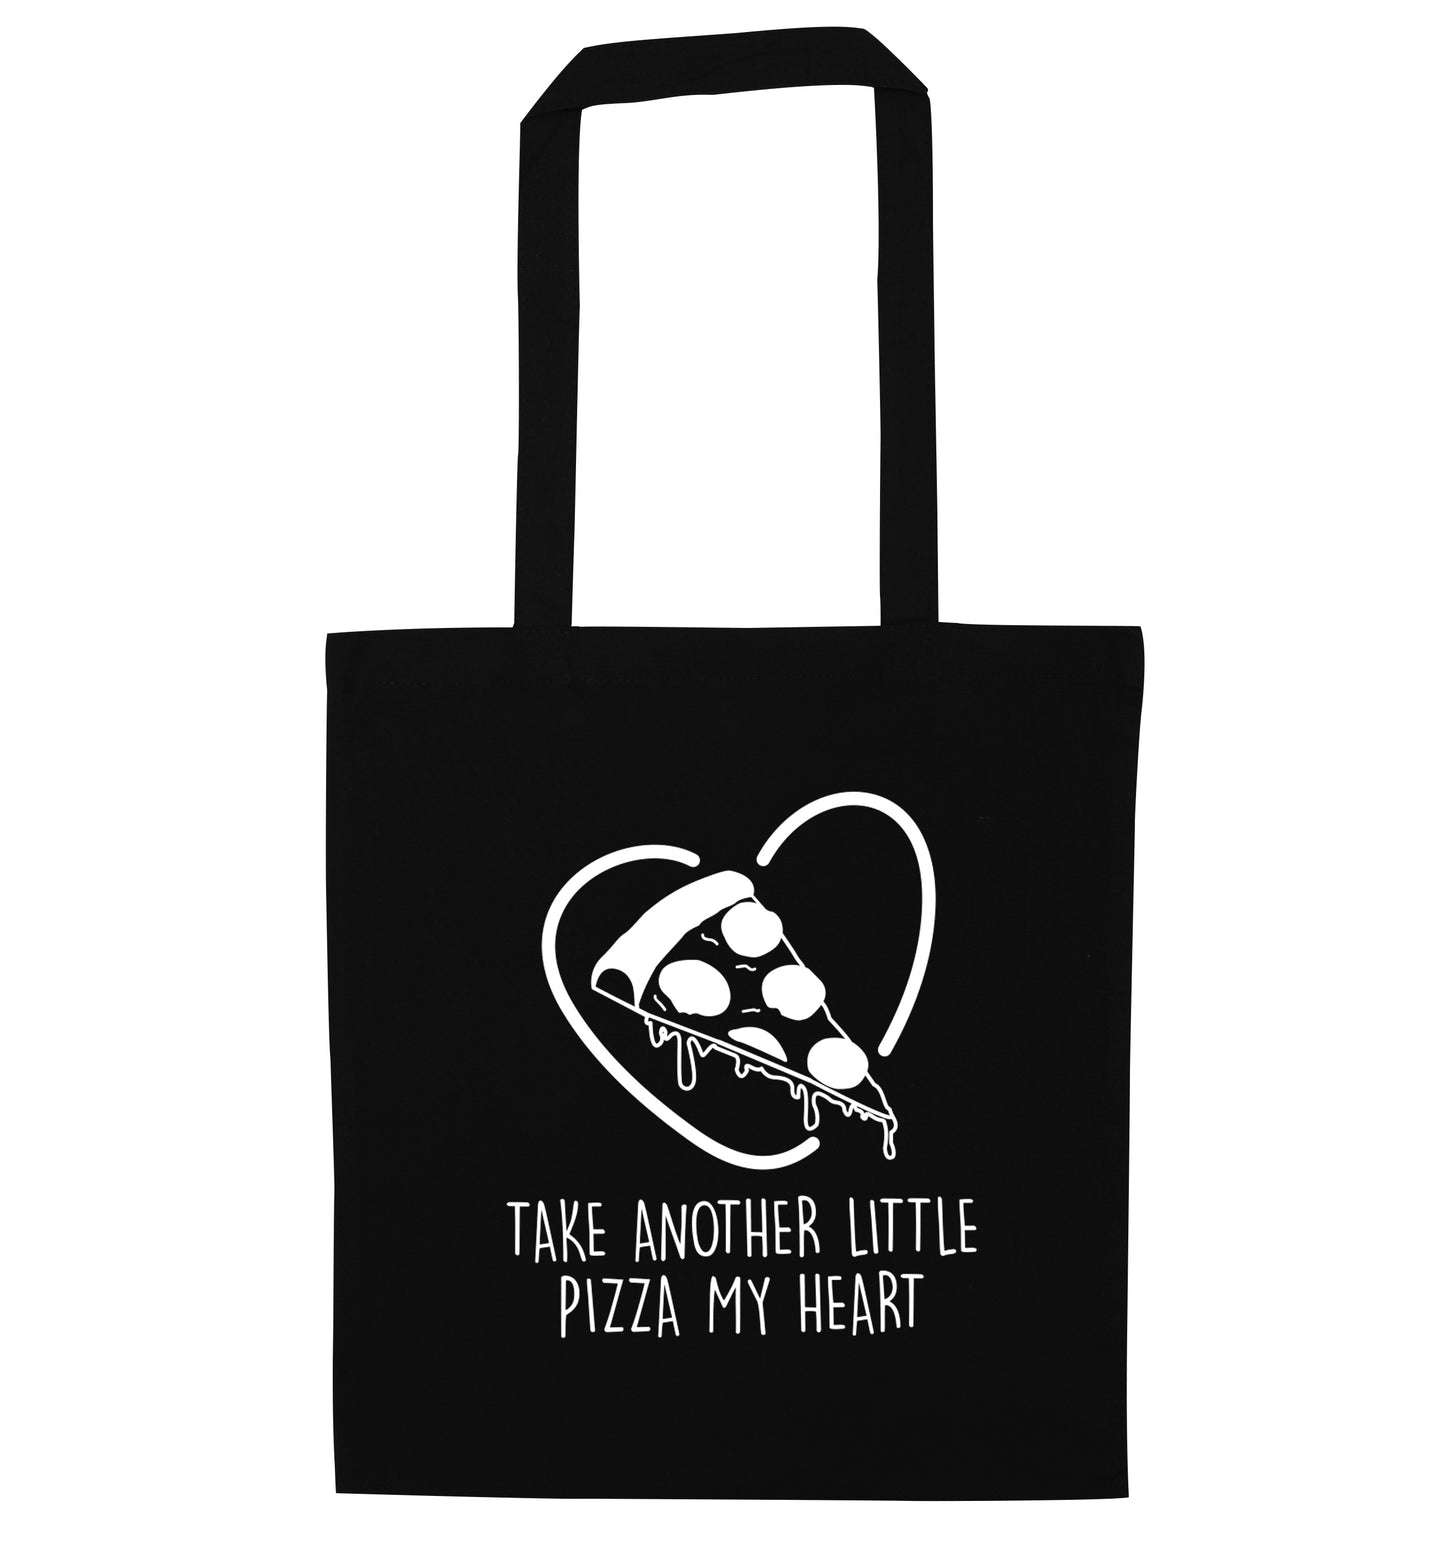 Take another little pizza my heart black tote bag